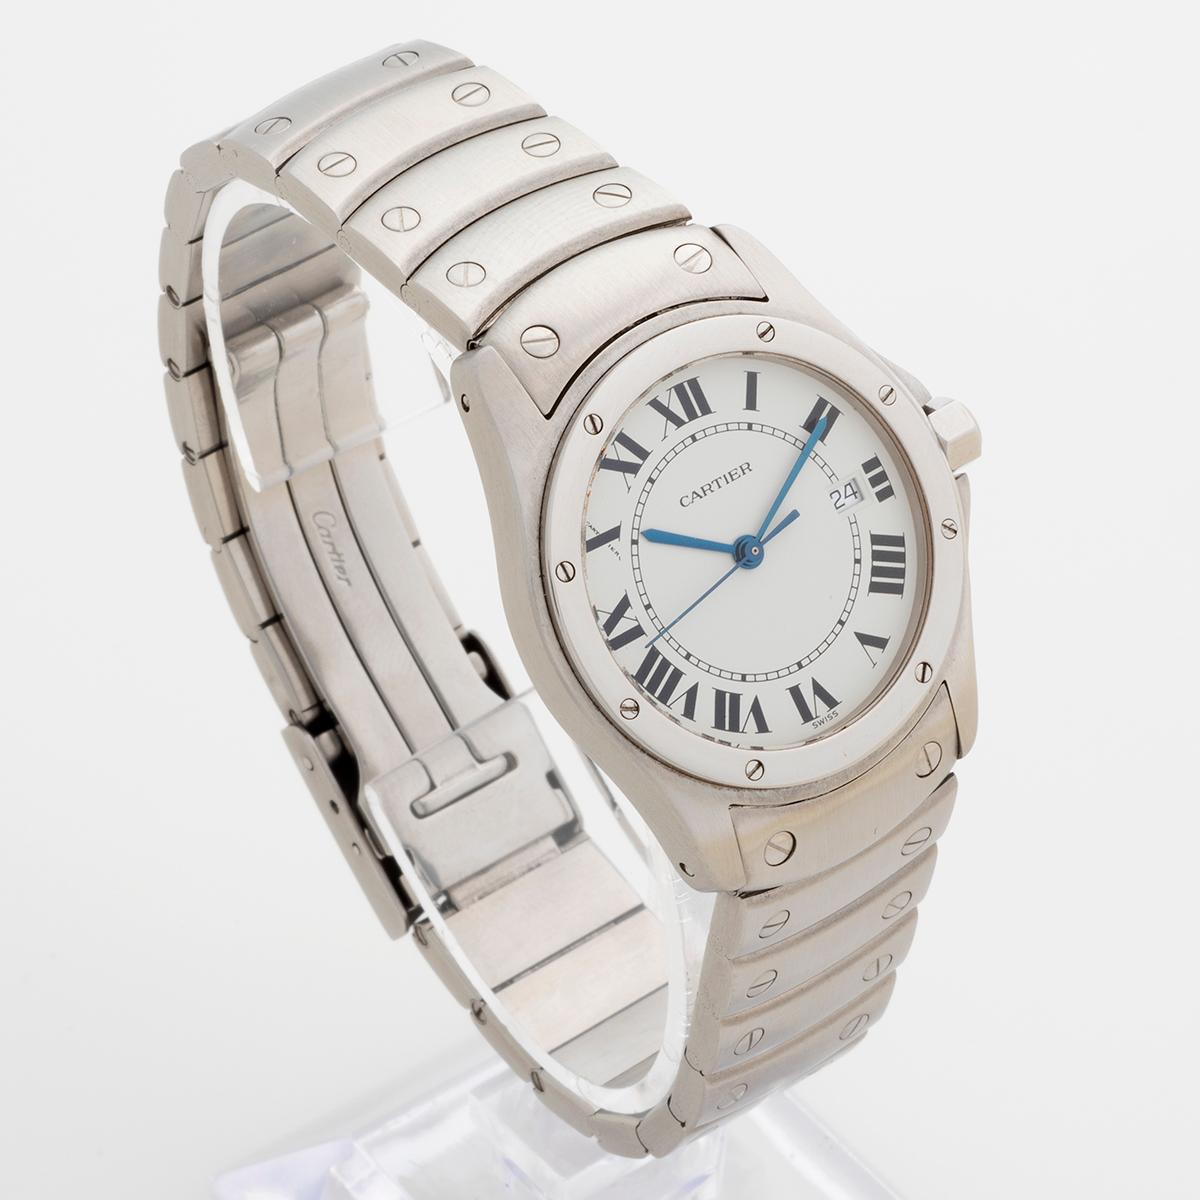 Our beautiful and iconic Cartier Santos ronde quartz in stainless steel, with stainless steel bracelet is the large 29mm case version, suitable for a lady who prefers a larger watch or a mid size gent's (for whom it was originally intended).